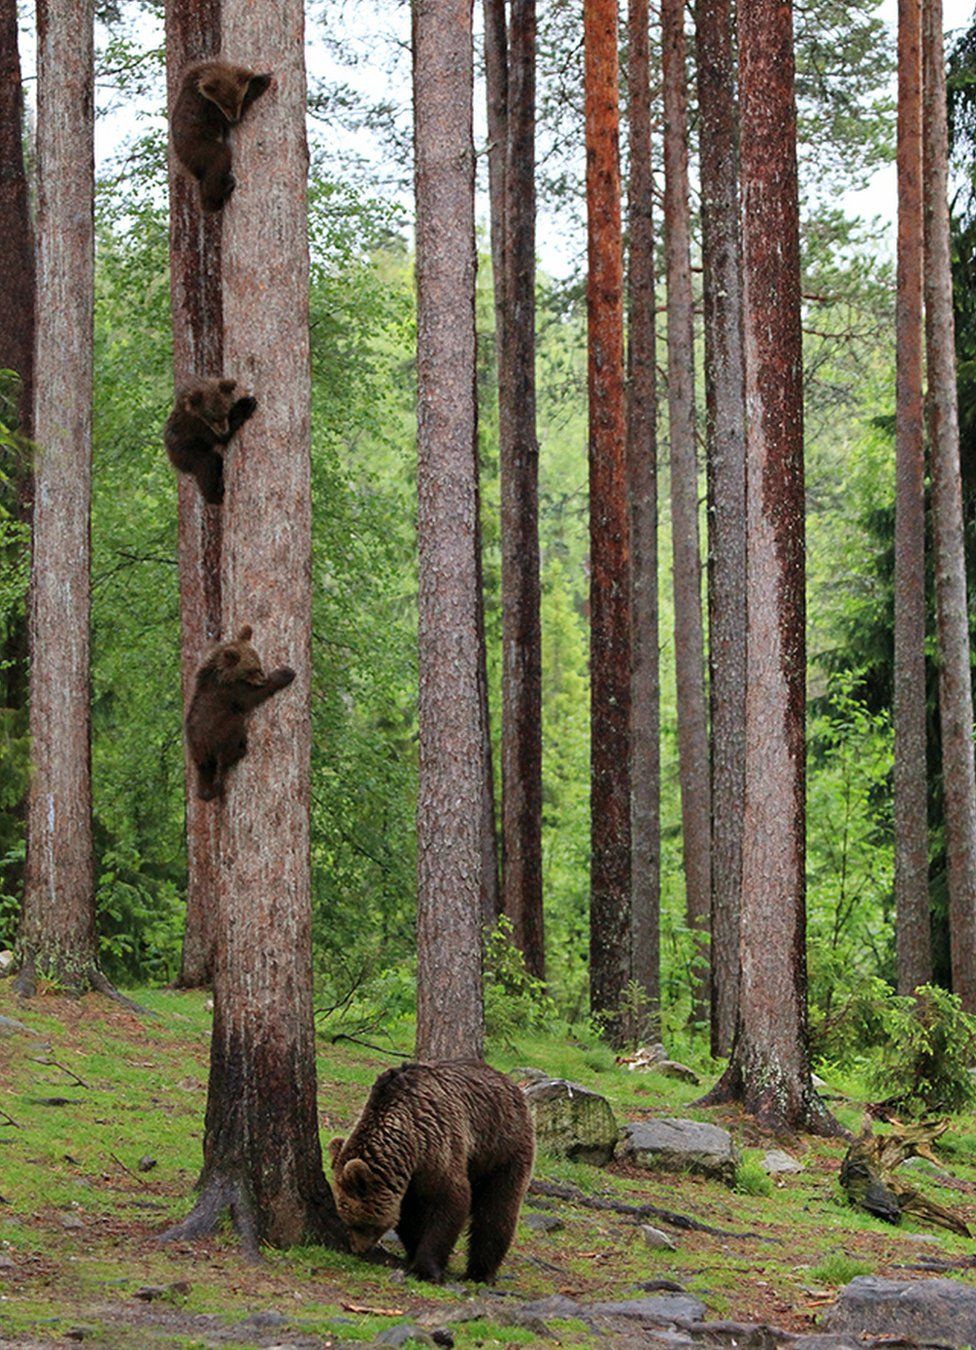 Three bear cubs on a tree trunk with an adult bear on the ground